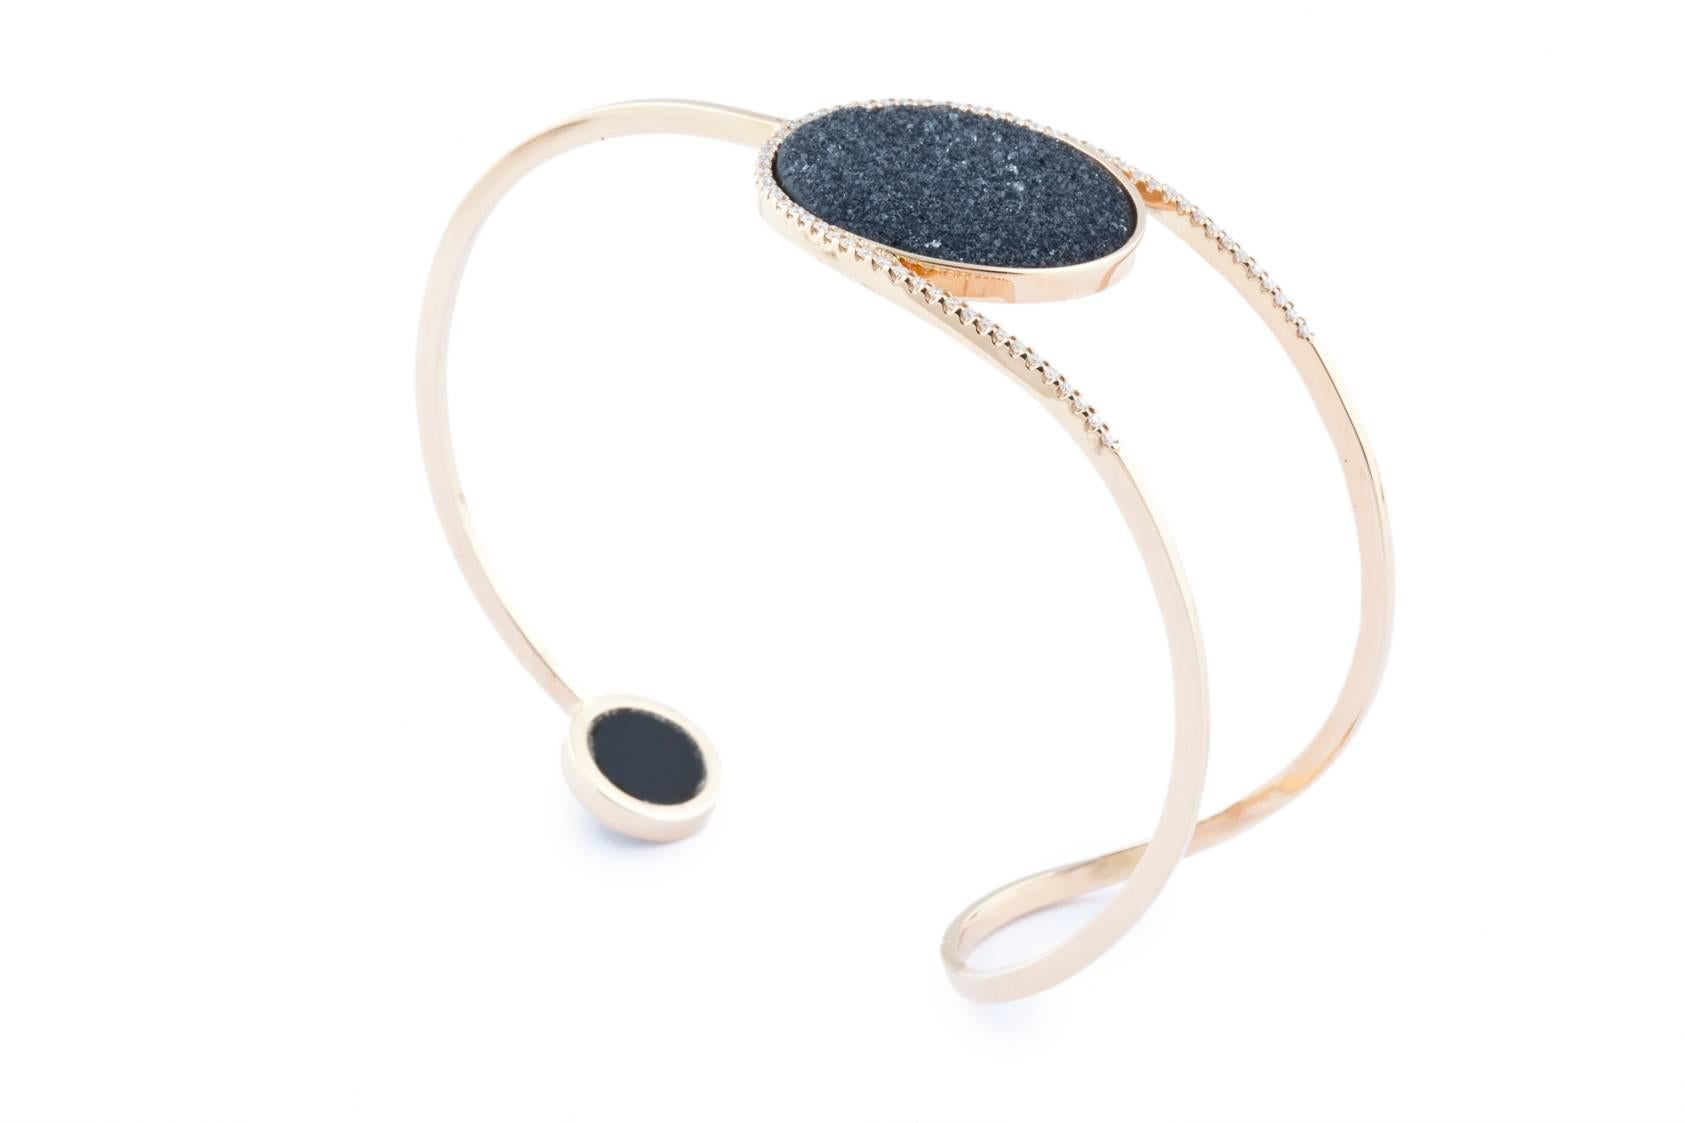 Black druzy agate and 0,38 ct diamonds, the perfect match!
Set in 18k rose gold, this bracelet had the look of a cuff, but so elegant and delicate...
It looks like a sculpture, a piece of art.
